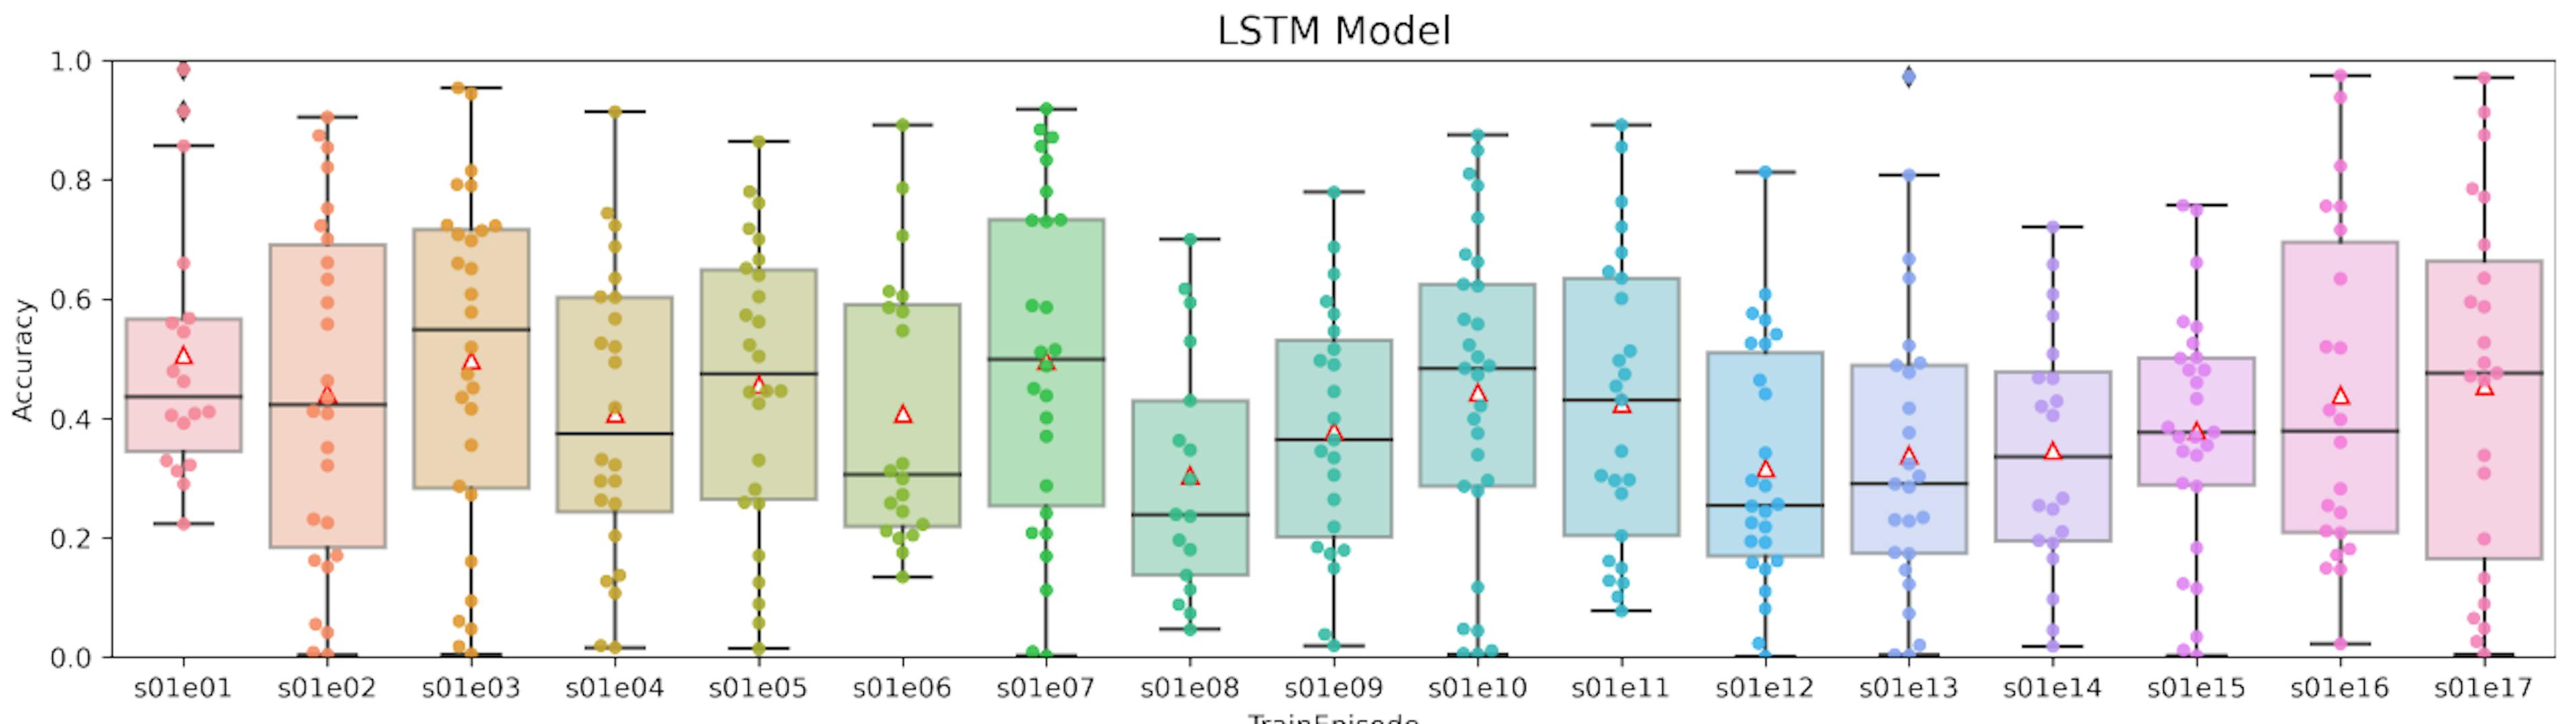 Figure 13: Box plot with results obtained using the LSTM model